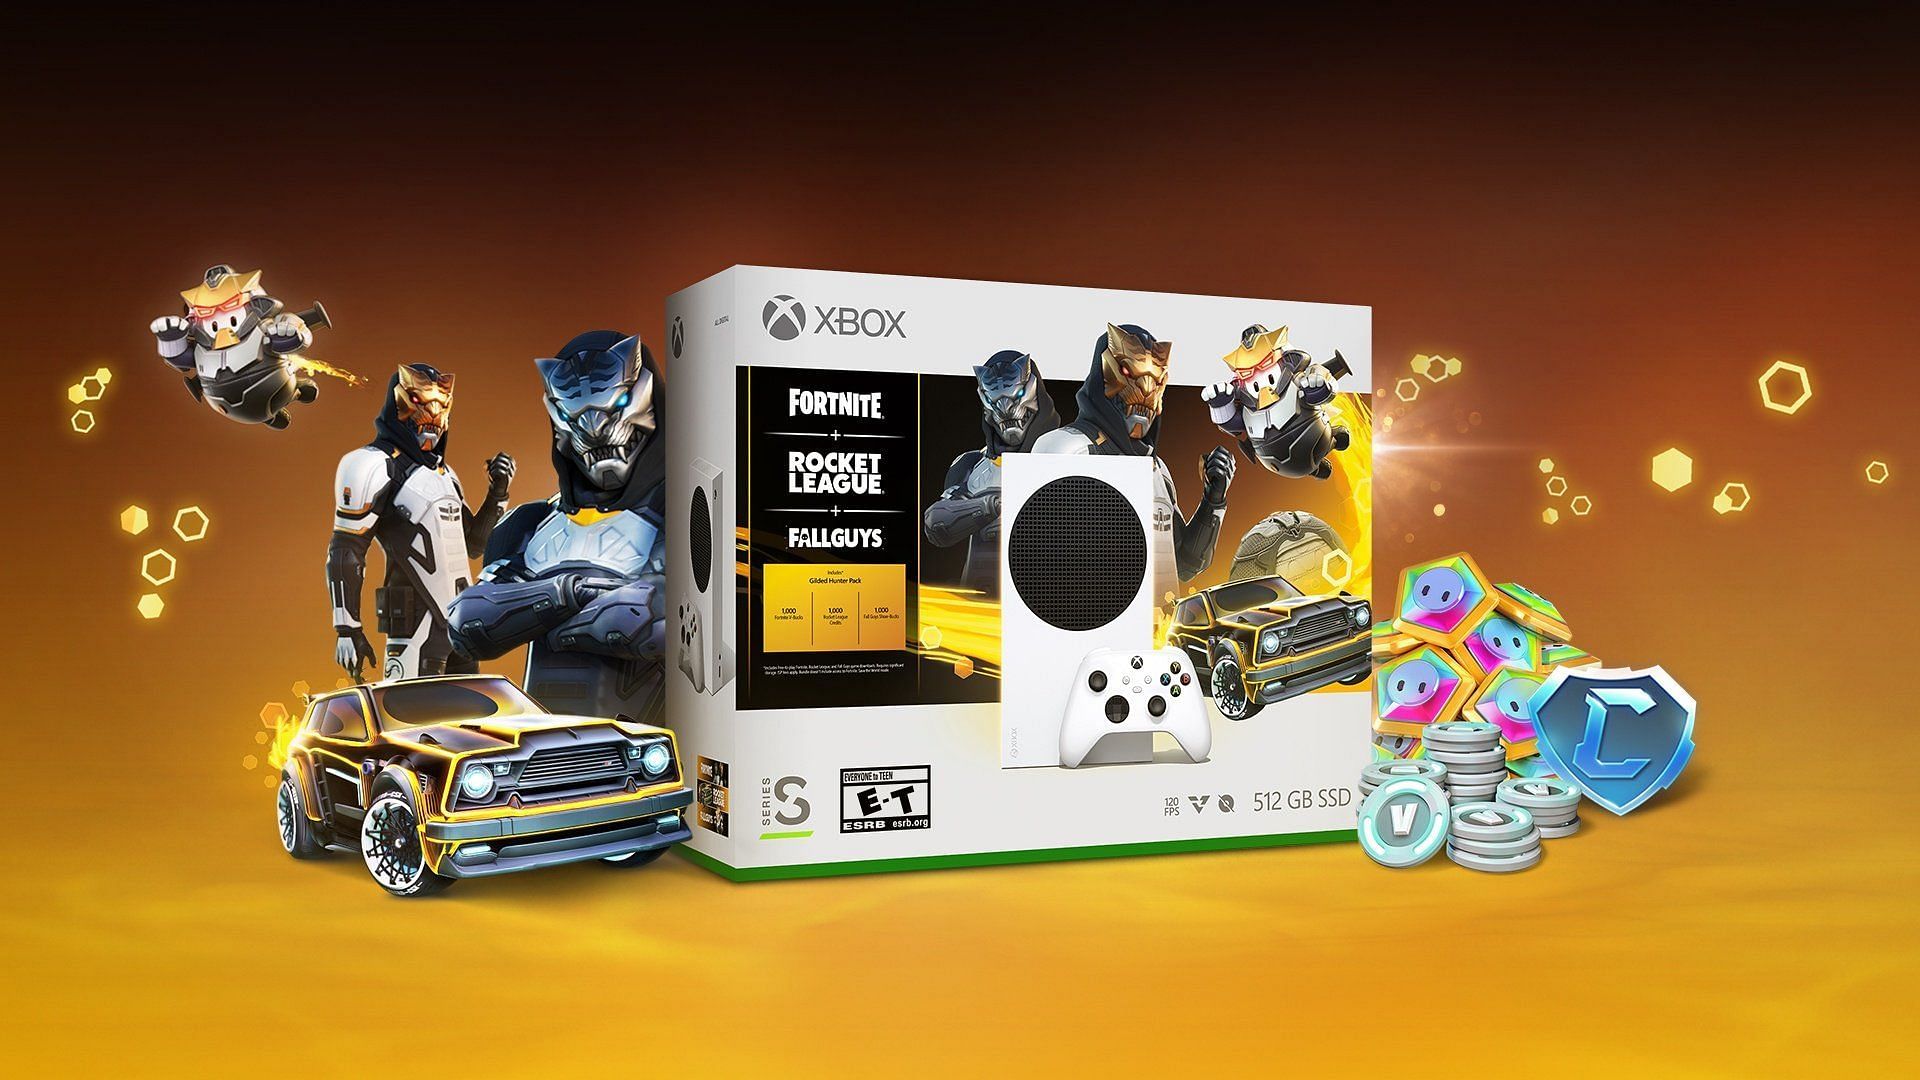 Xbox has released a special bundle in collaboration with Epic (Image via Xbox)